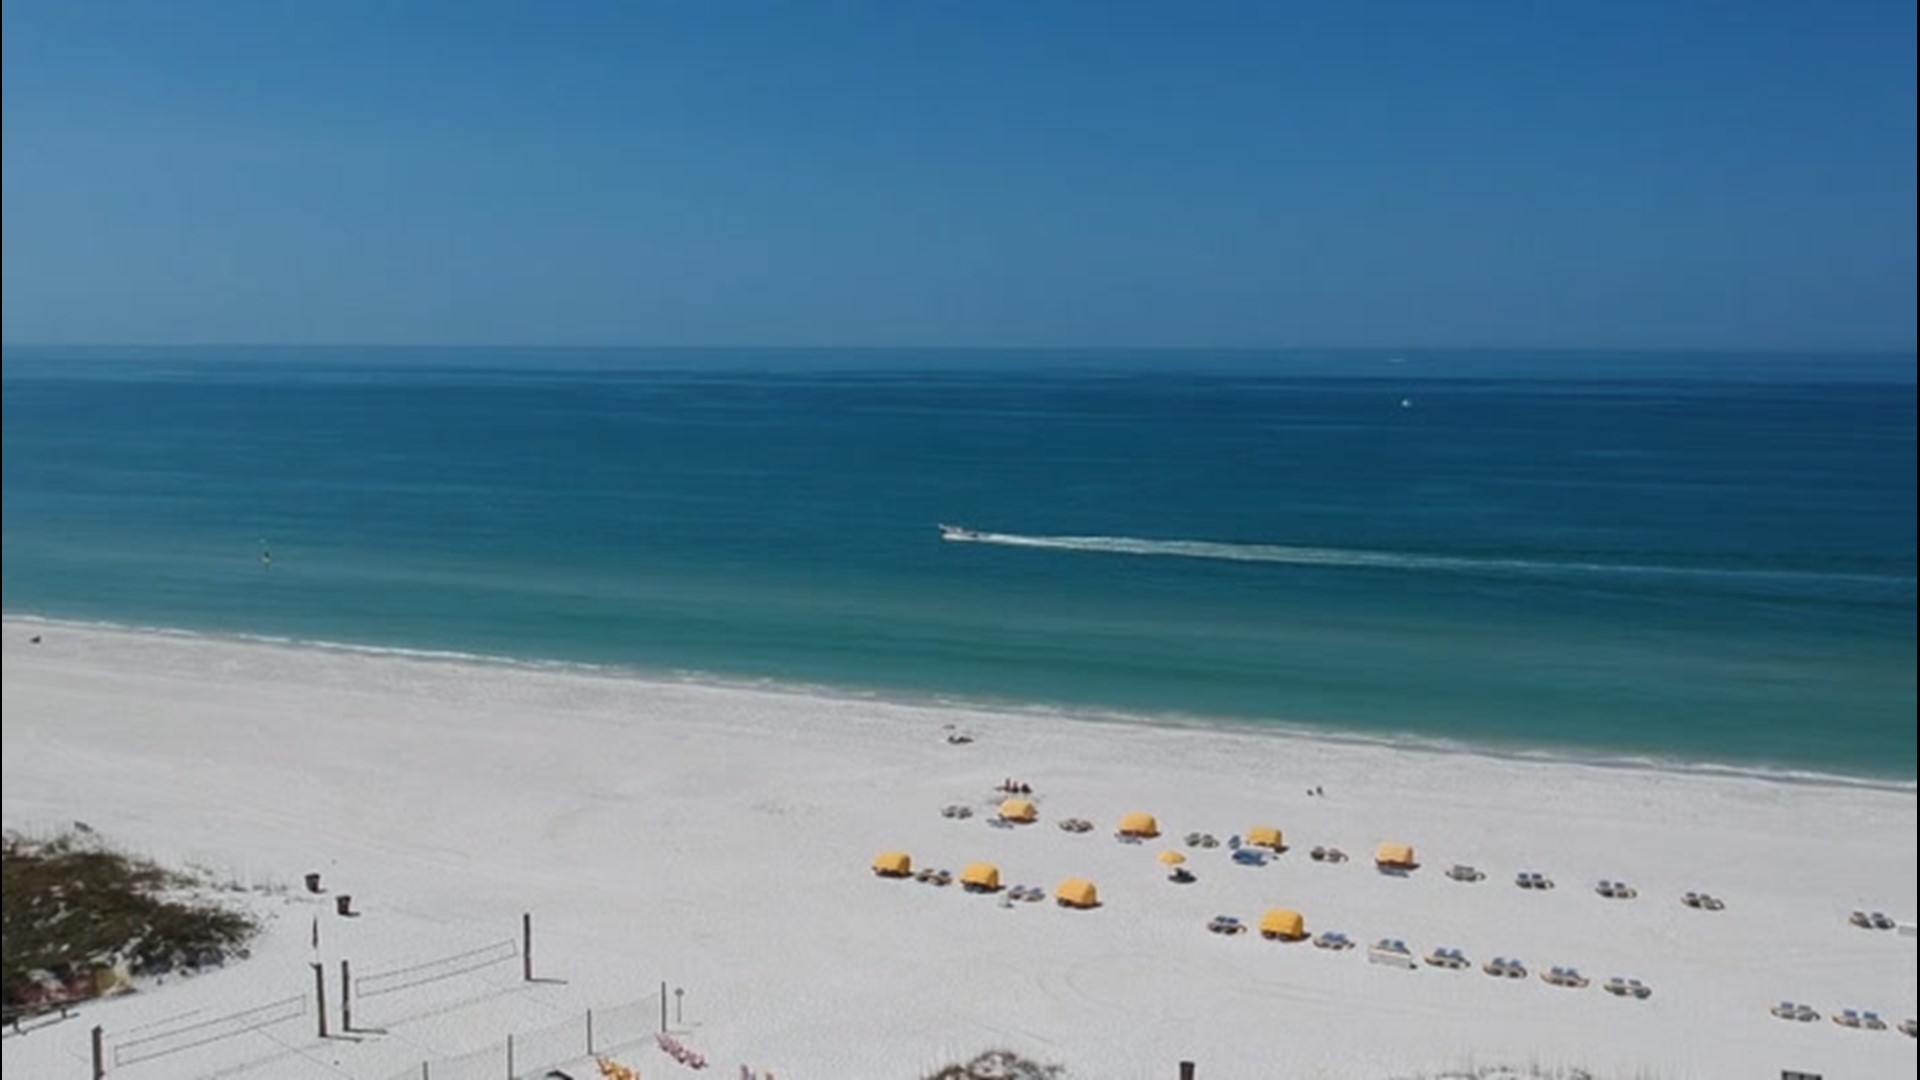 The beaches in St. Pete Beach, Florida, were completely devoid of people on March 21 after restrictions on beach access were put into place.